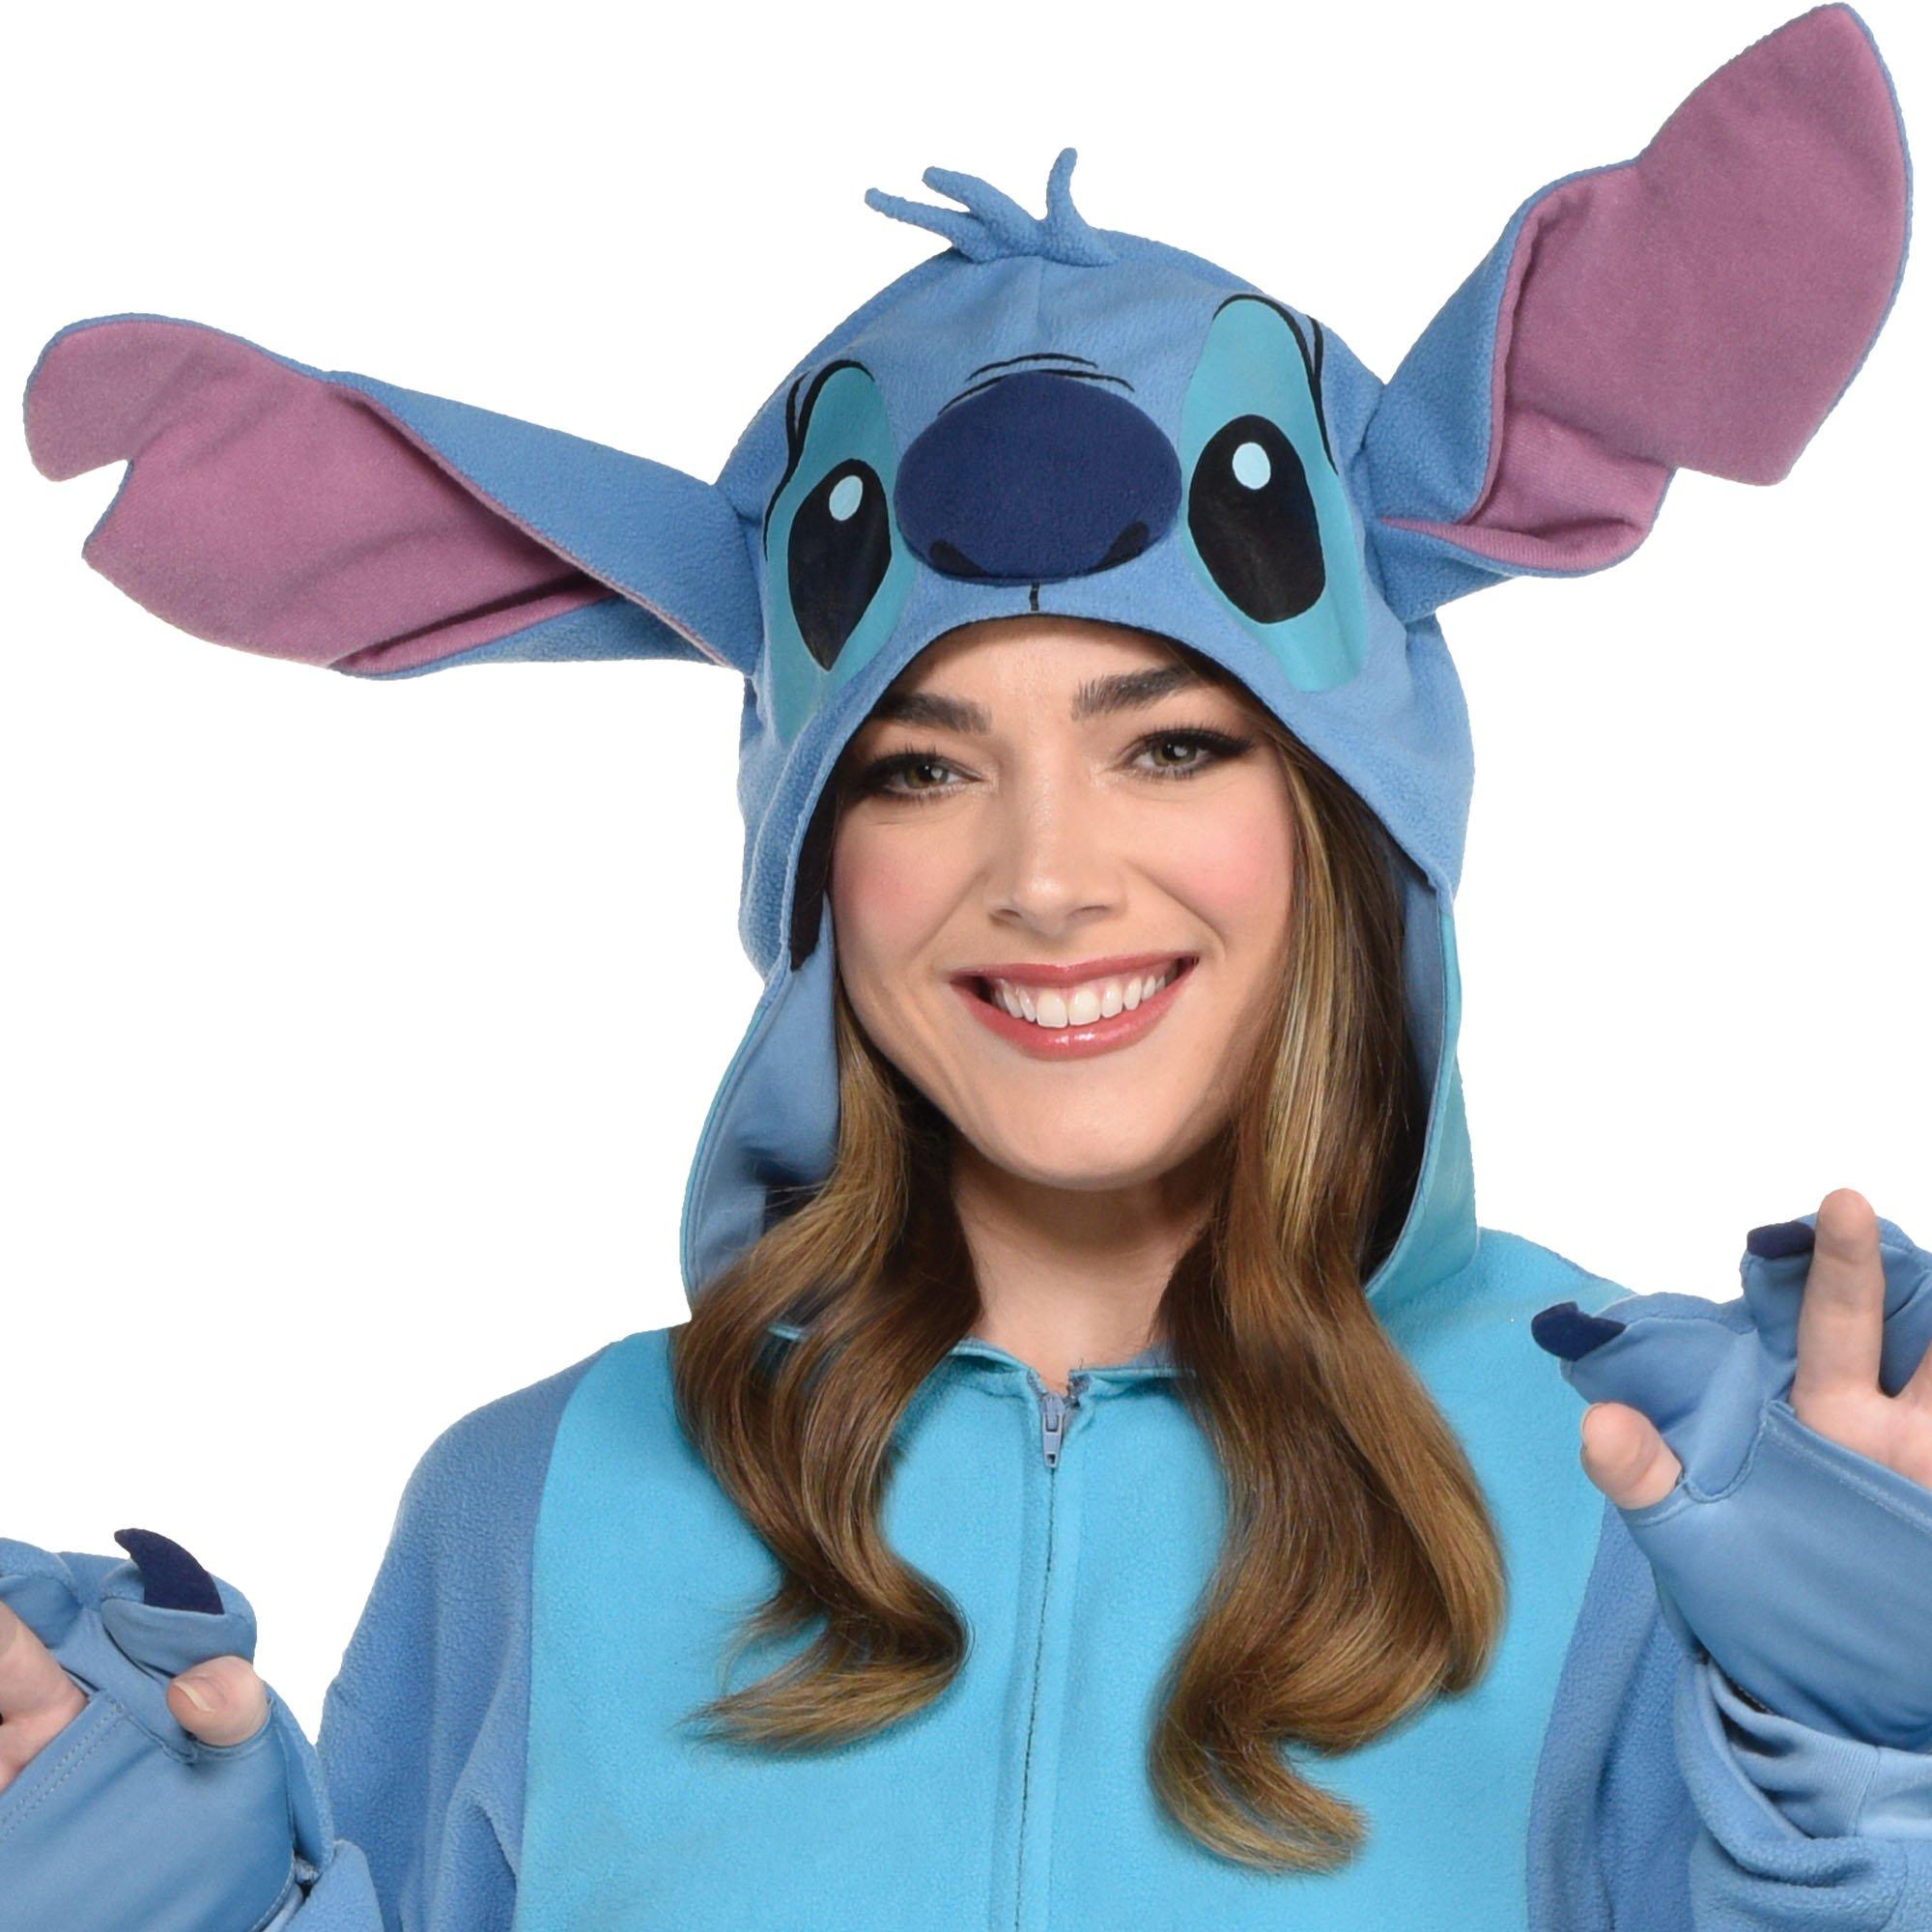 Adult Disney Lilo & Stitch Long Sleeve Hoodie with Ears, Blue, S/M,  Wearable Costume Accessory for Halloween